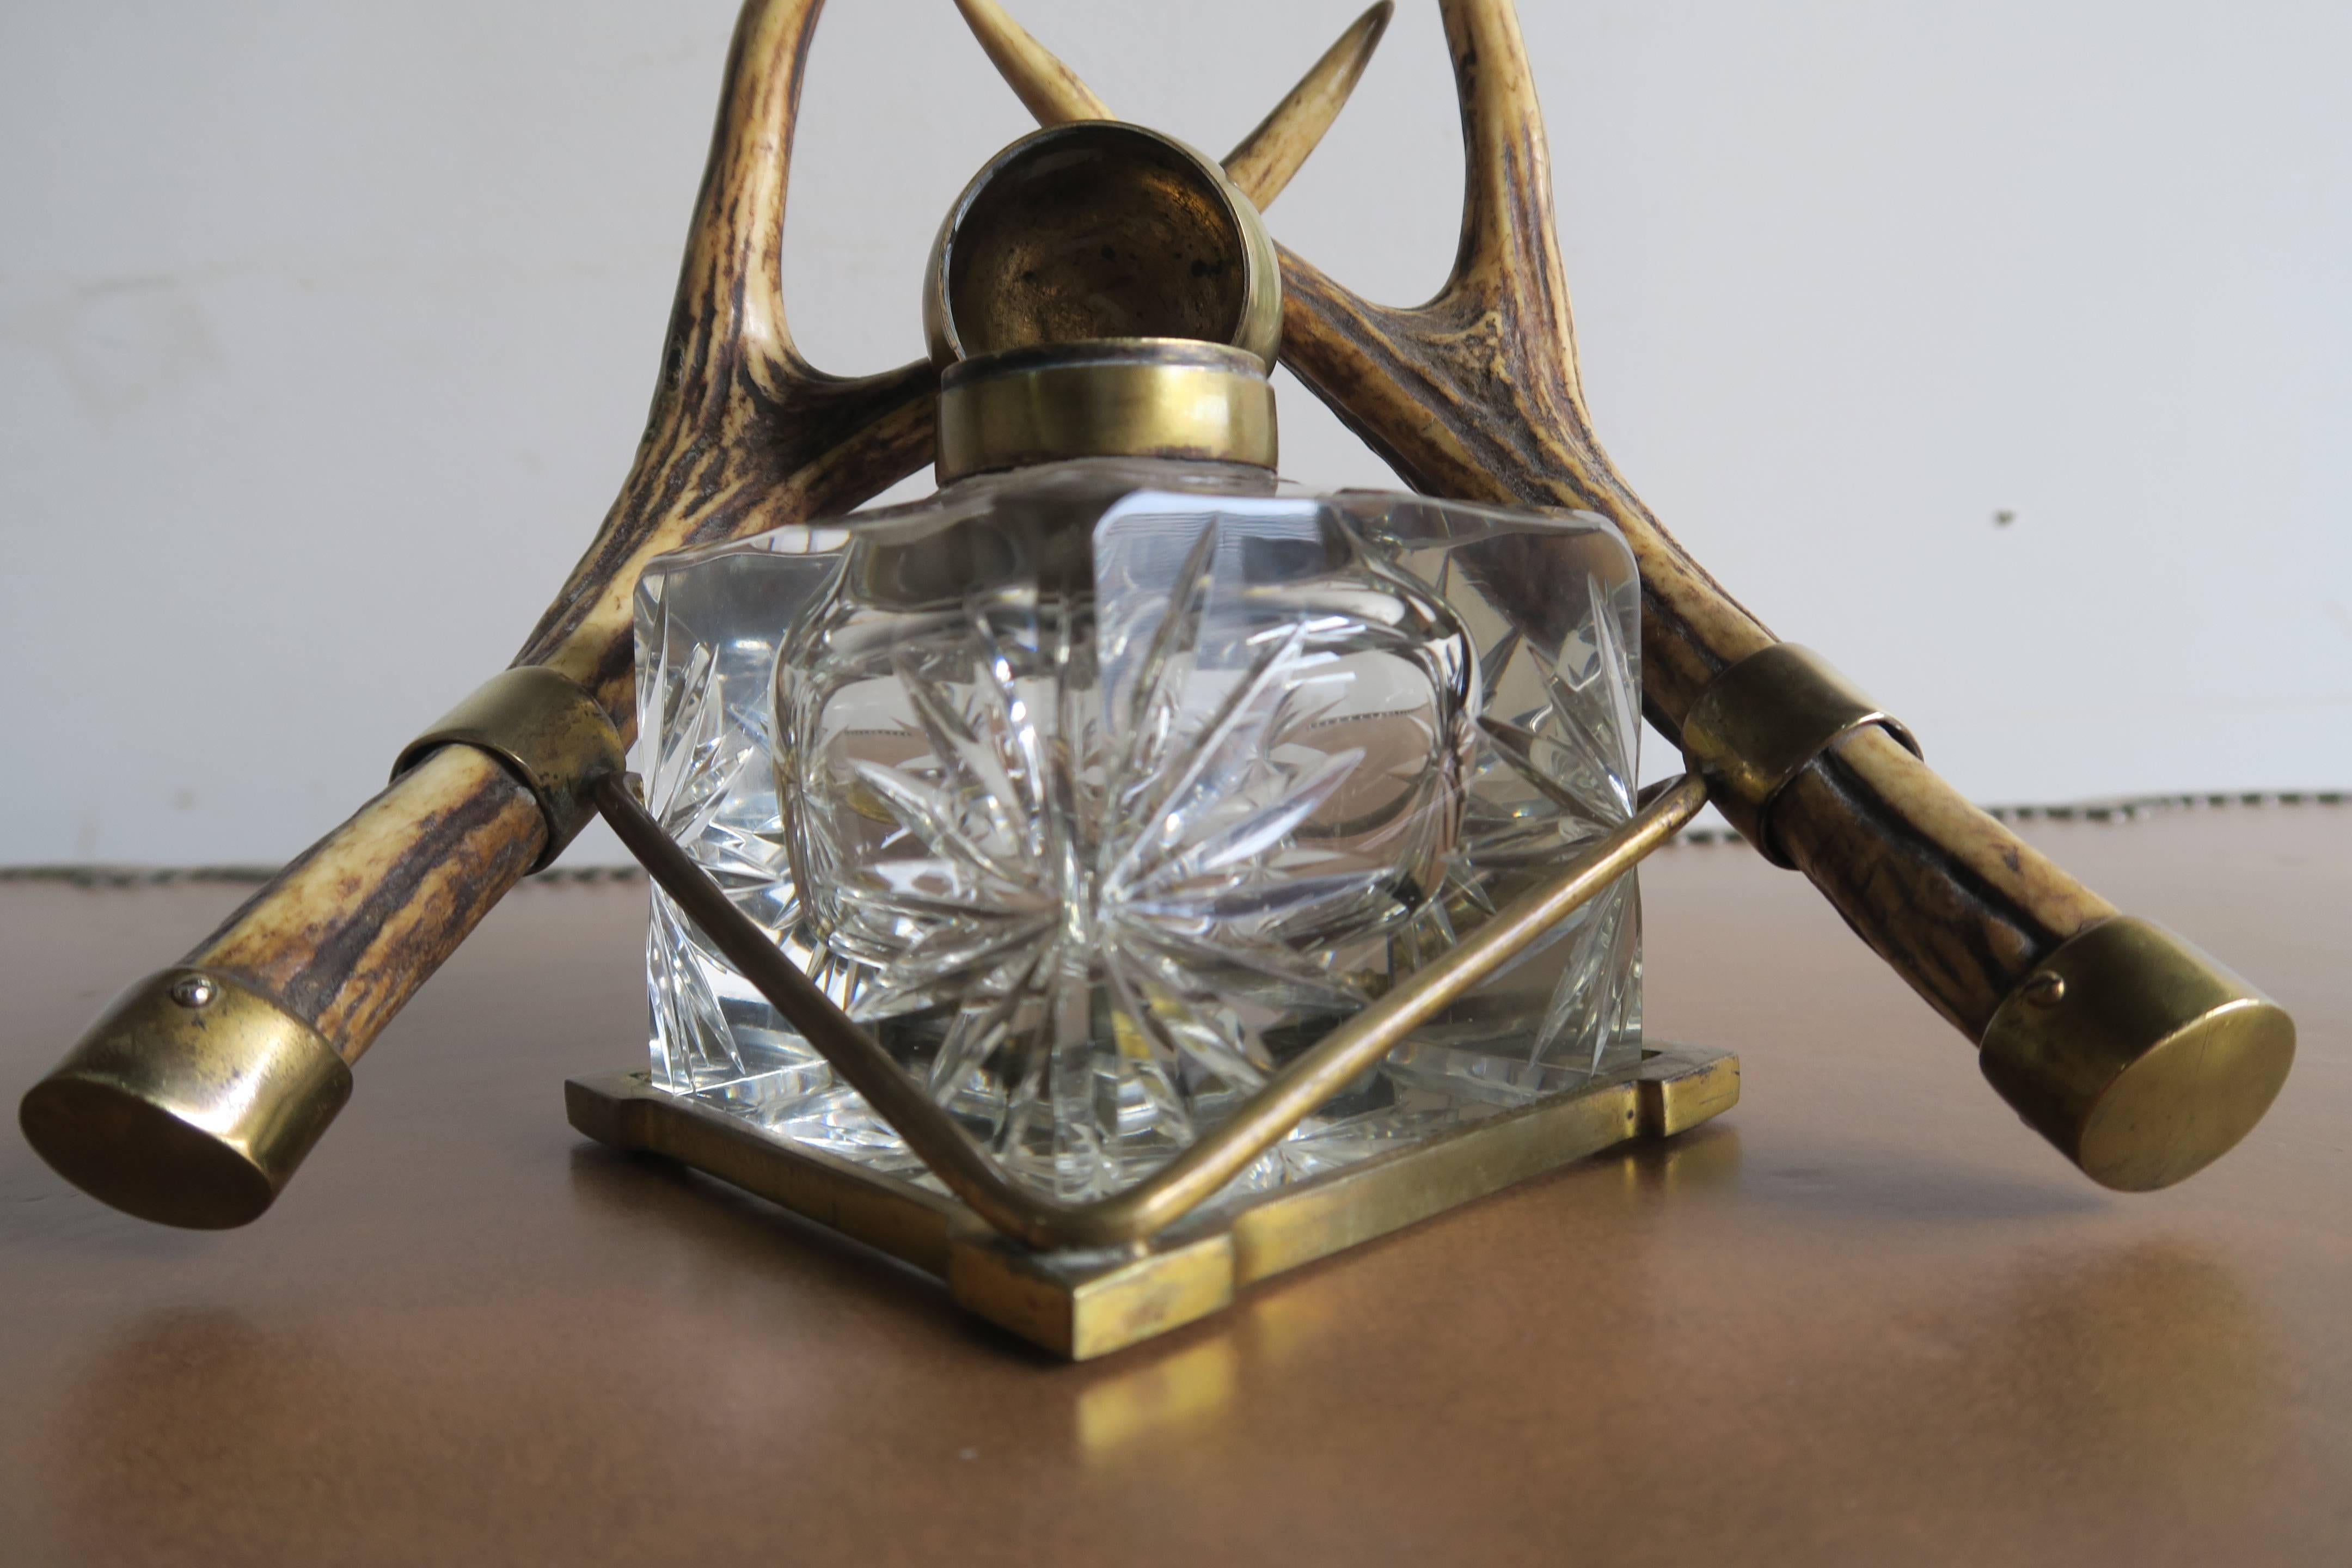 Rare 19th century English inkwell on horn and brass base. Crystal ink well with starburst design. Brass top and base.